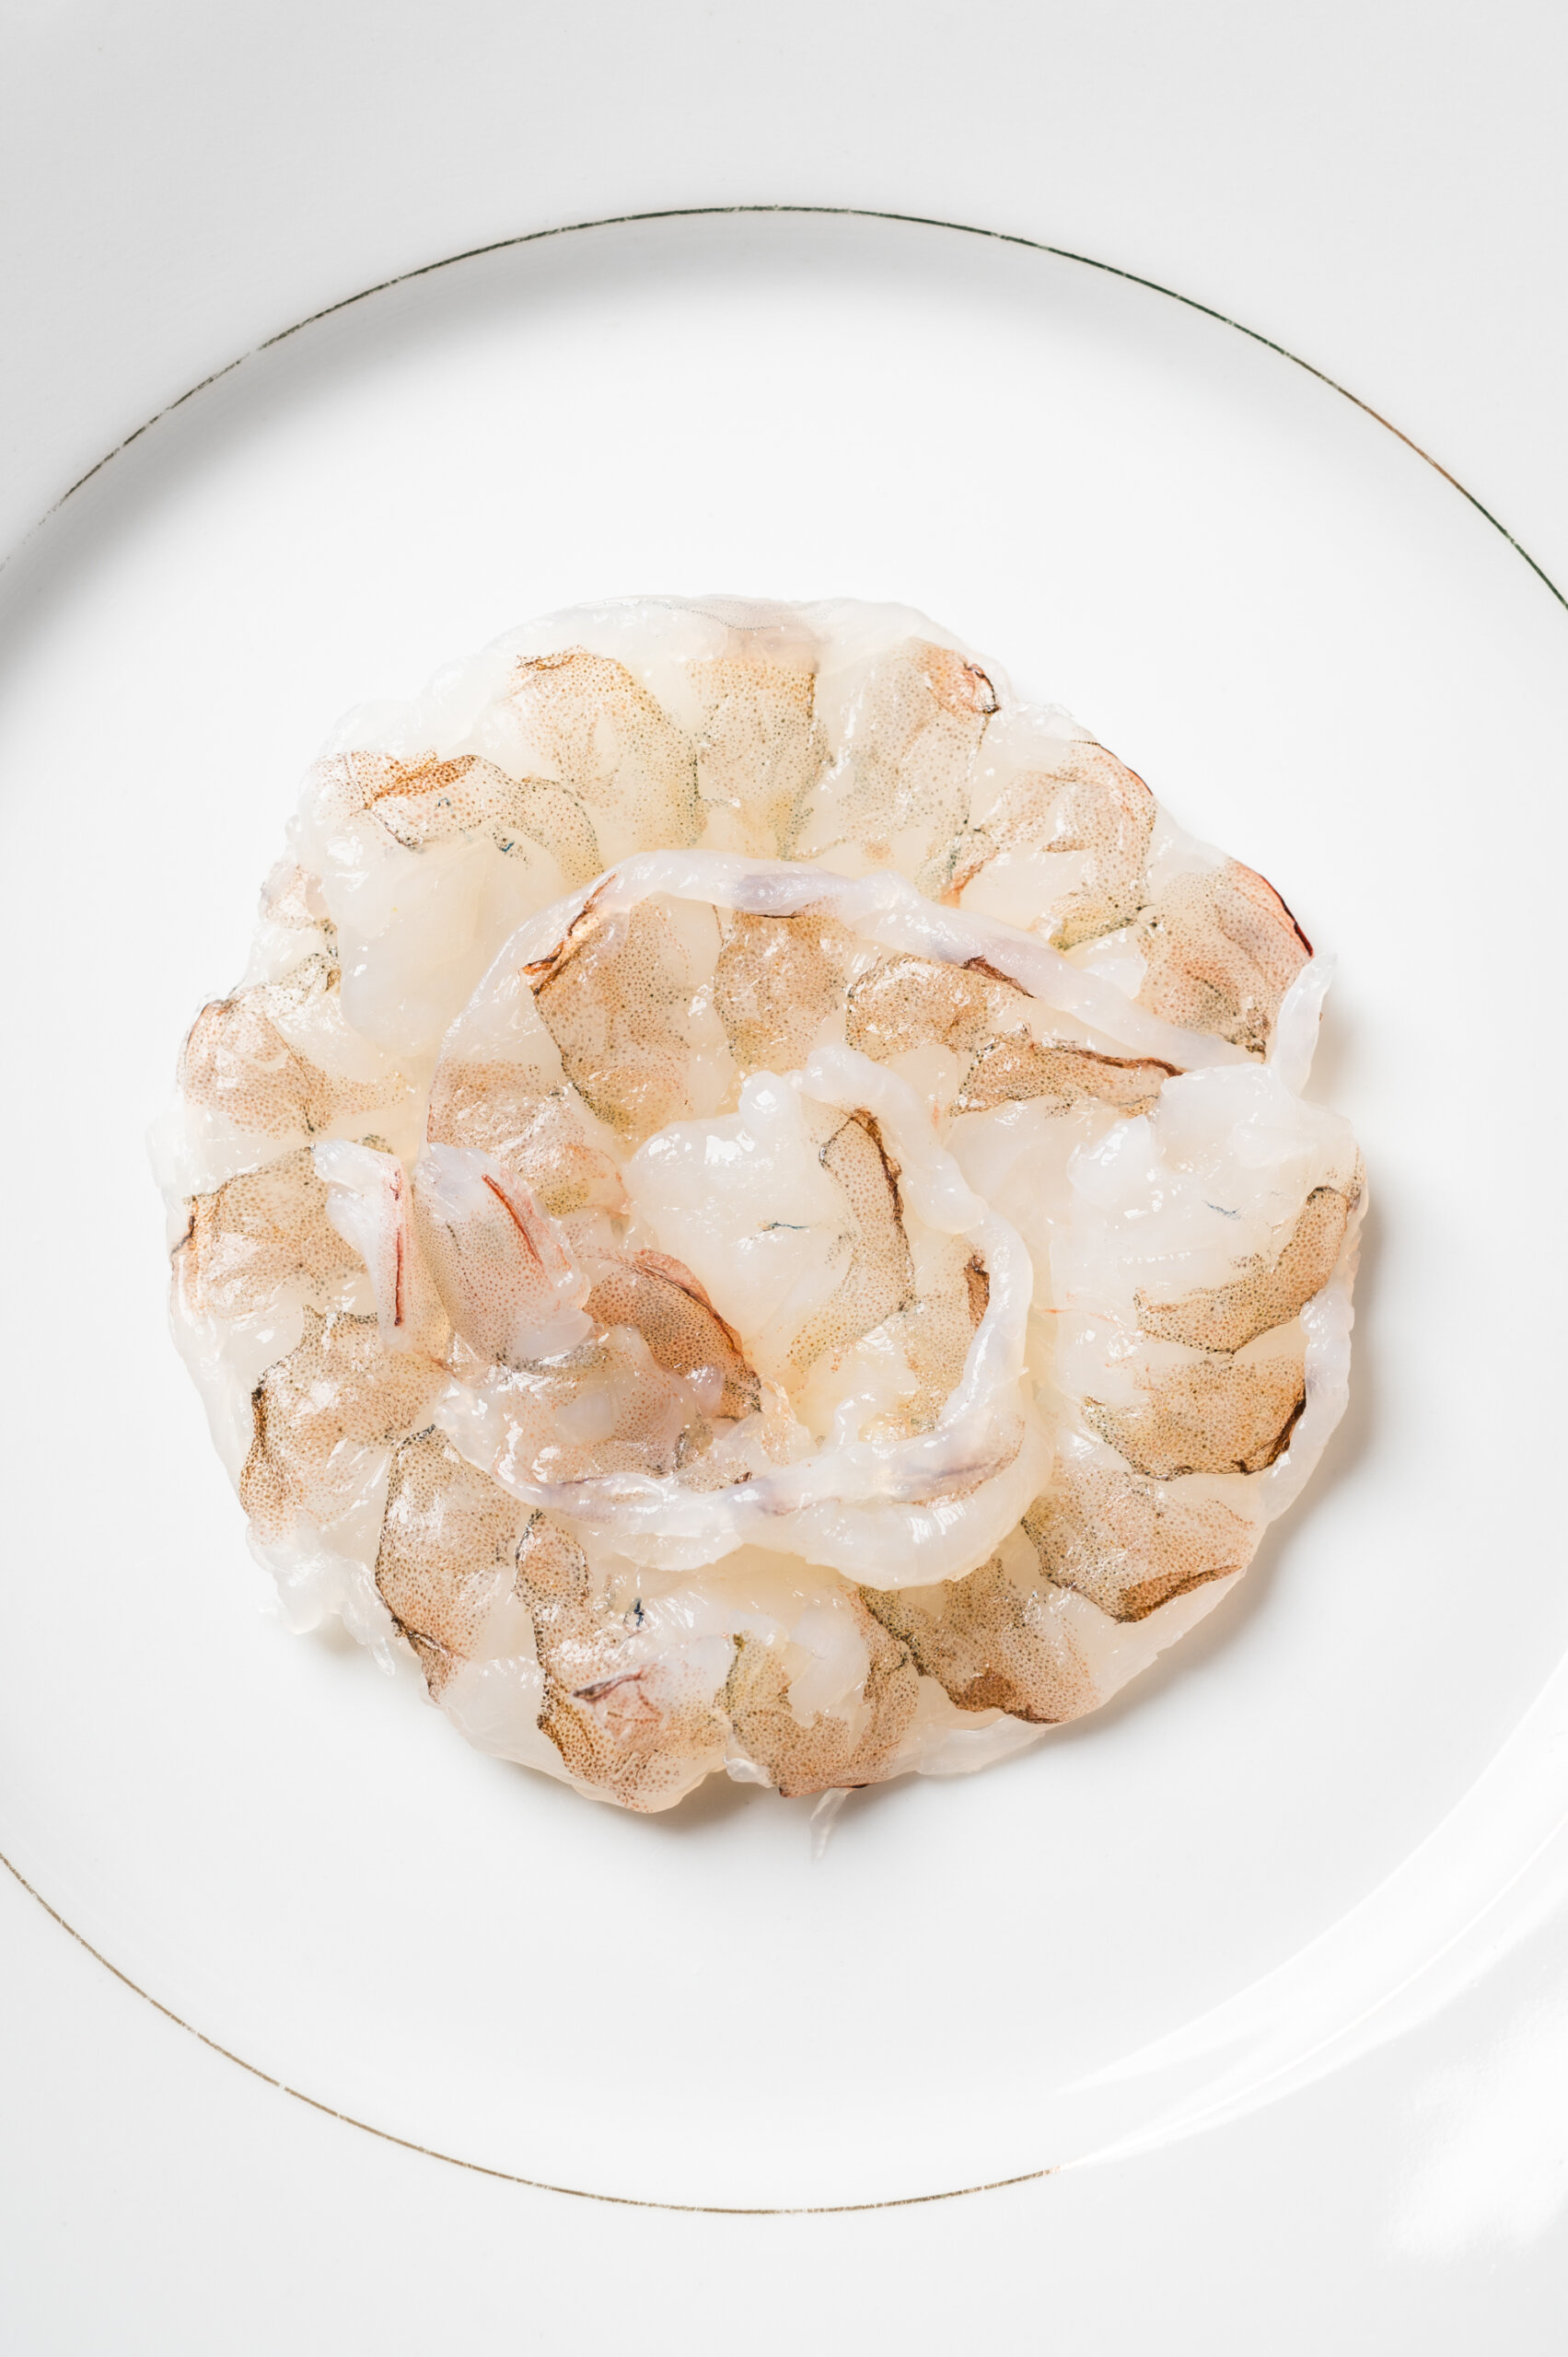 Raw shrimp plated in a circular pattern